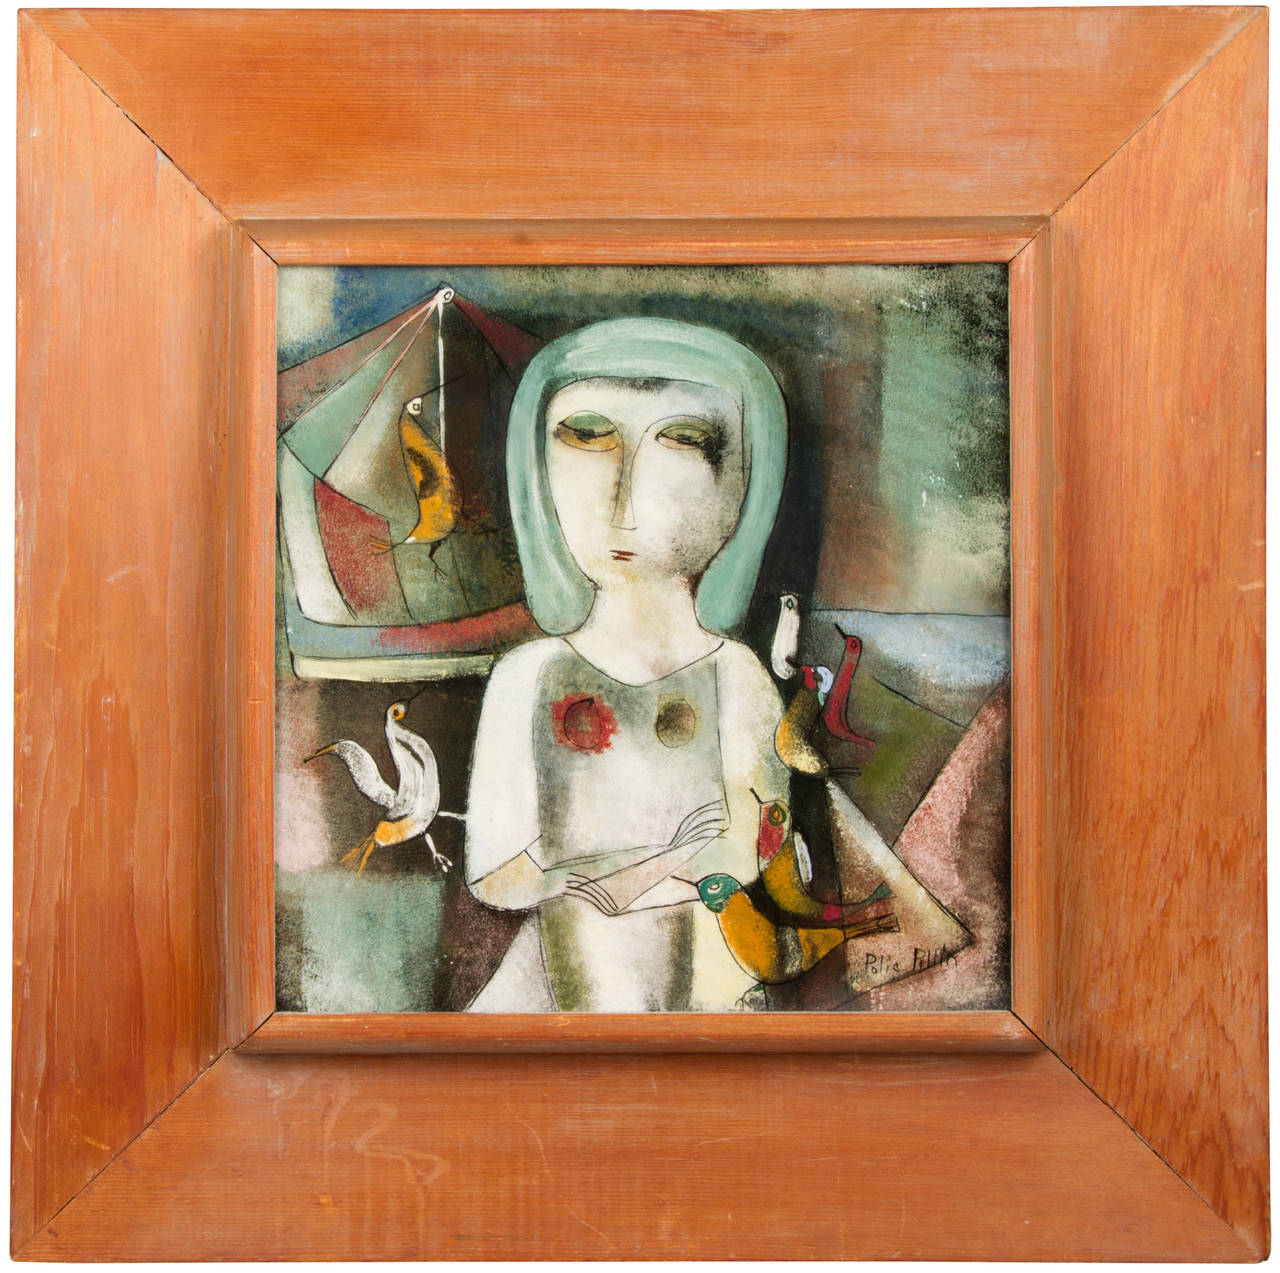 This is a wonderful and exceptional framed wall tile in the Expressionist style. This piece exemplifies Pillin's mastery of the glaze and her painterly style. Unframed the plaque measures 12.5